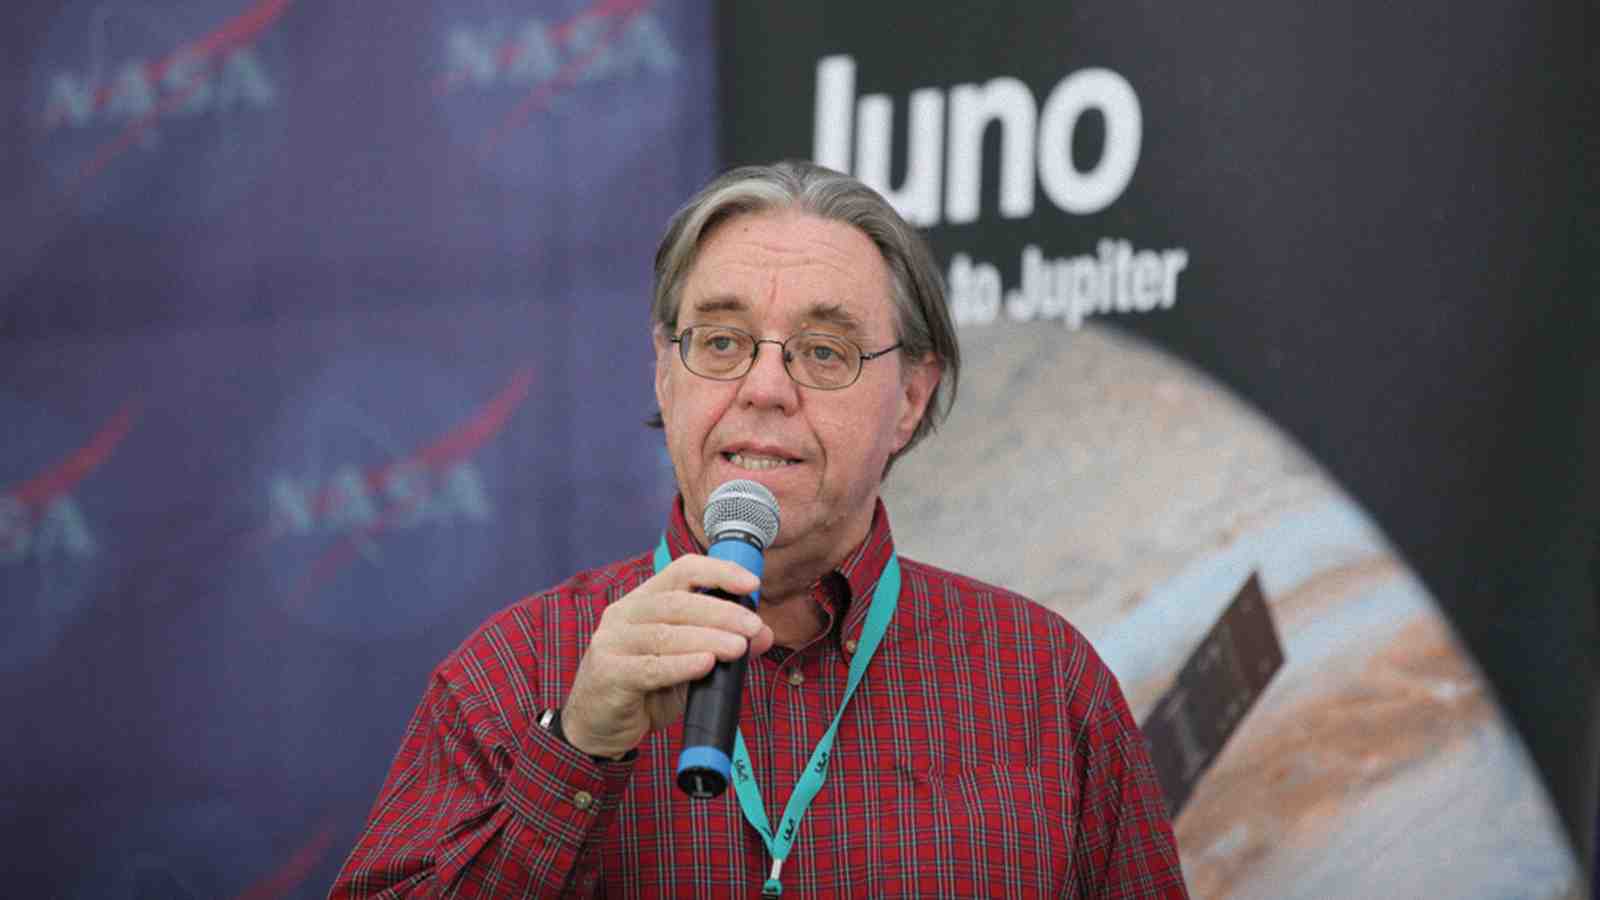 David Stevenson talks at a news conference at Cape Canaveral at the time of the launch of Juno.